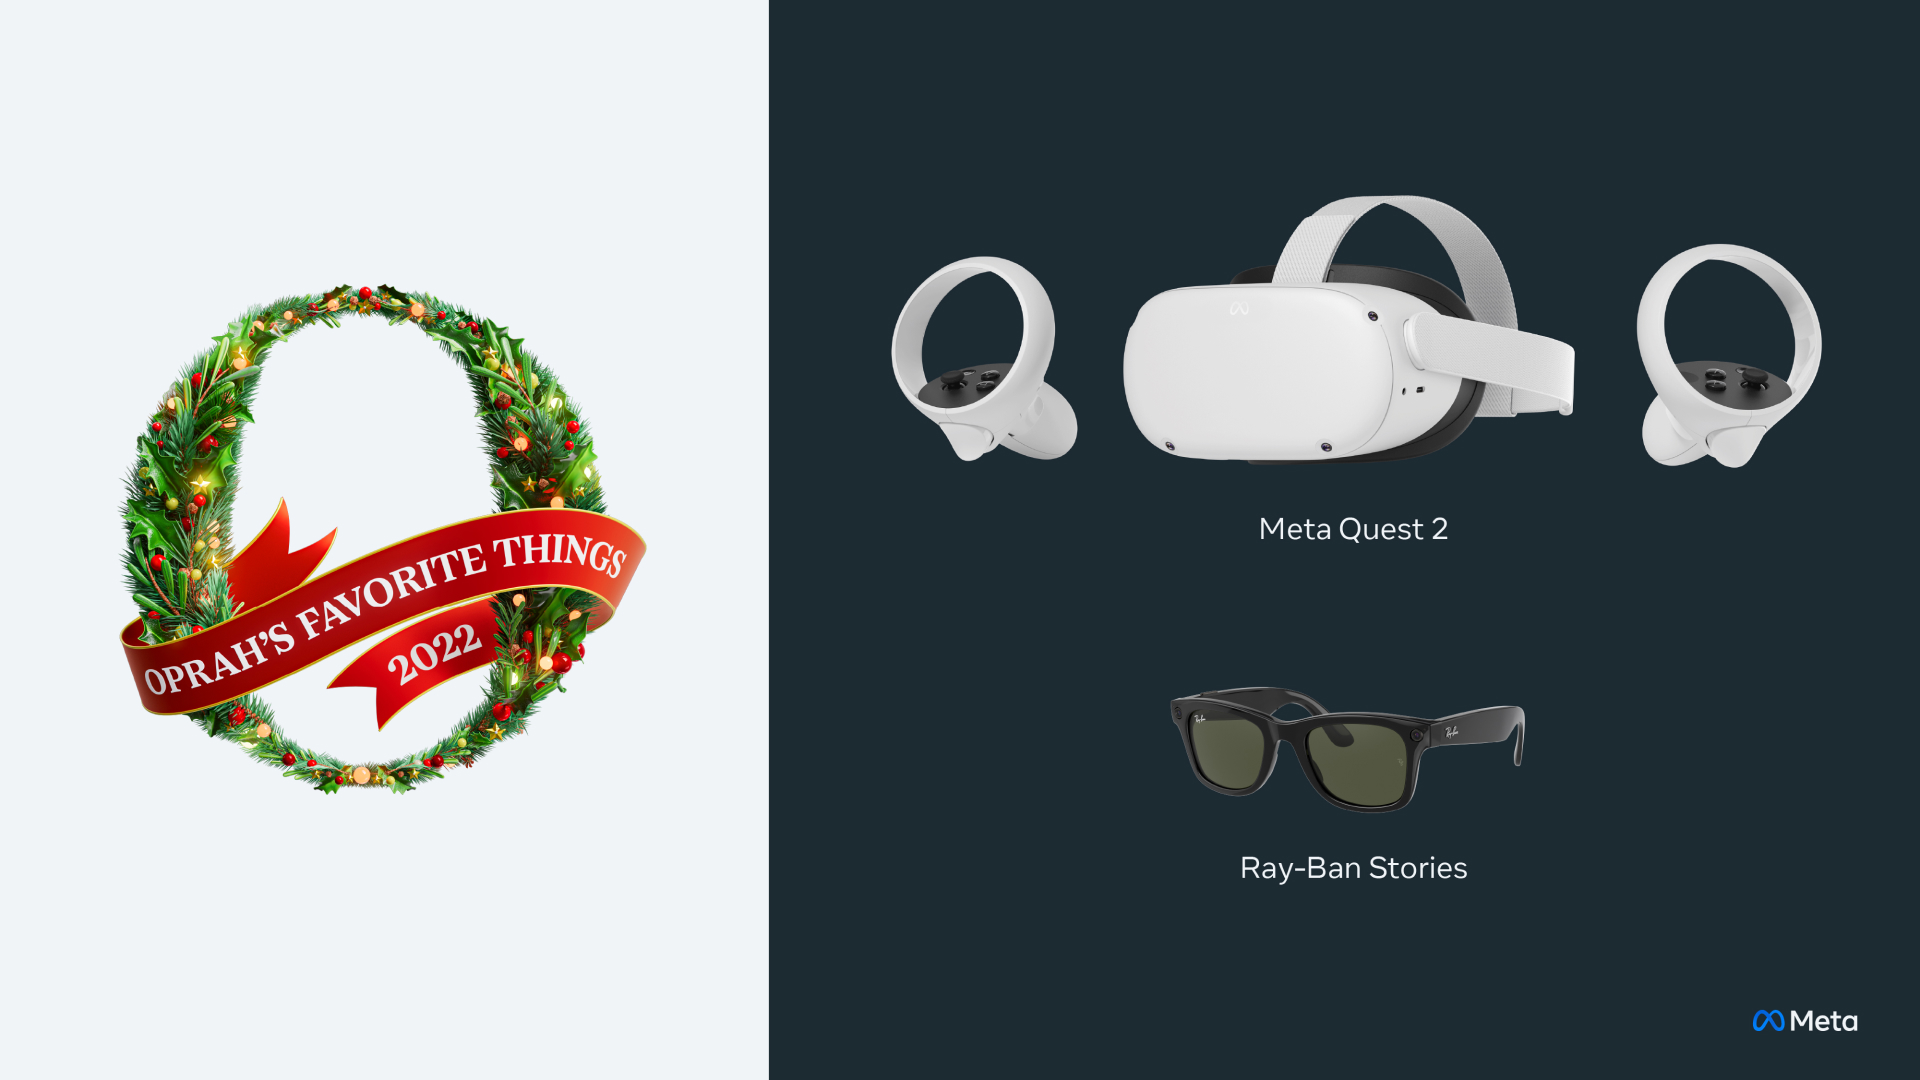 Image of Oprah's Favorite Things 2022 logo, Meta Quest 2 and ray-Ban Stories